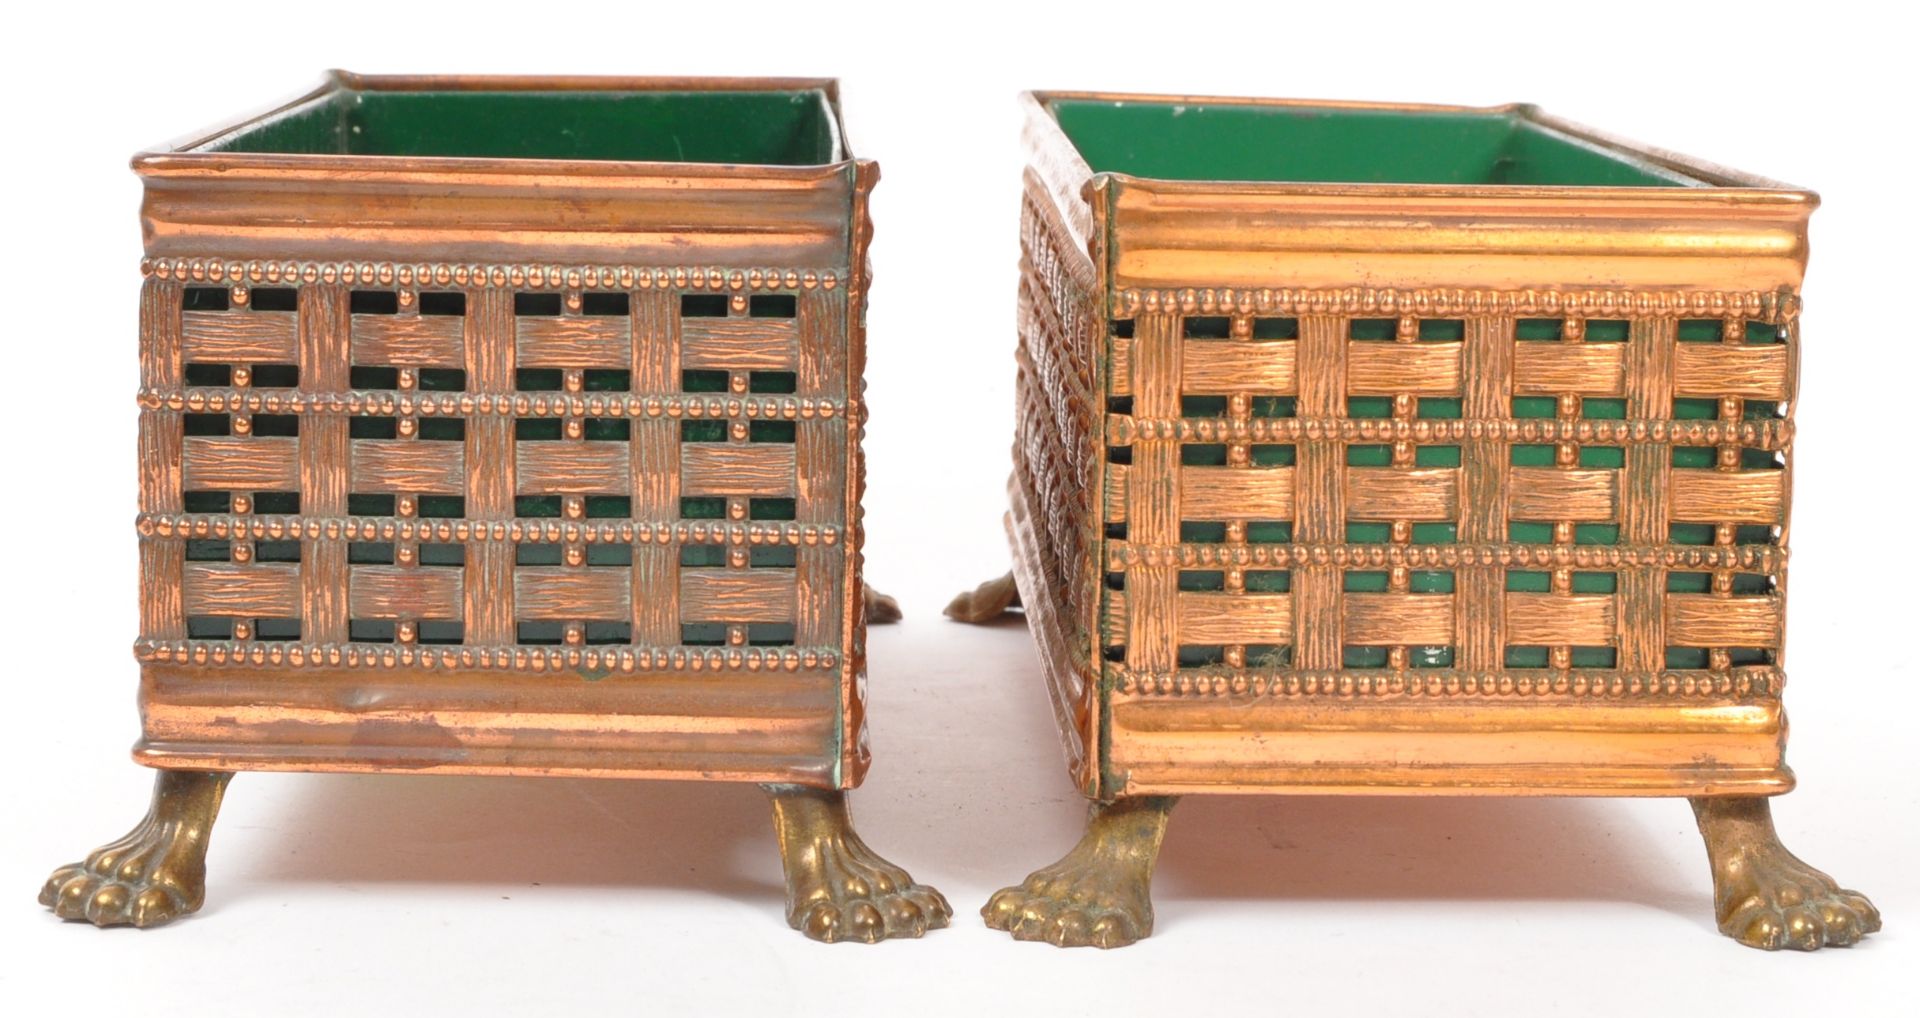 PAIR OF ART & CRAFTS EMBOSSED WICKER EFFECT COPPER PLANTERS - Image 2 of 5